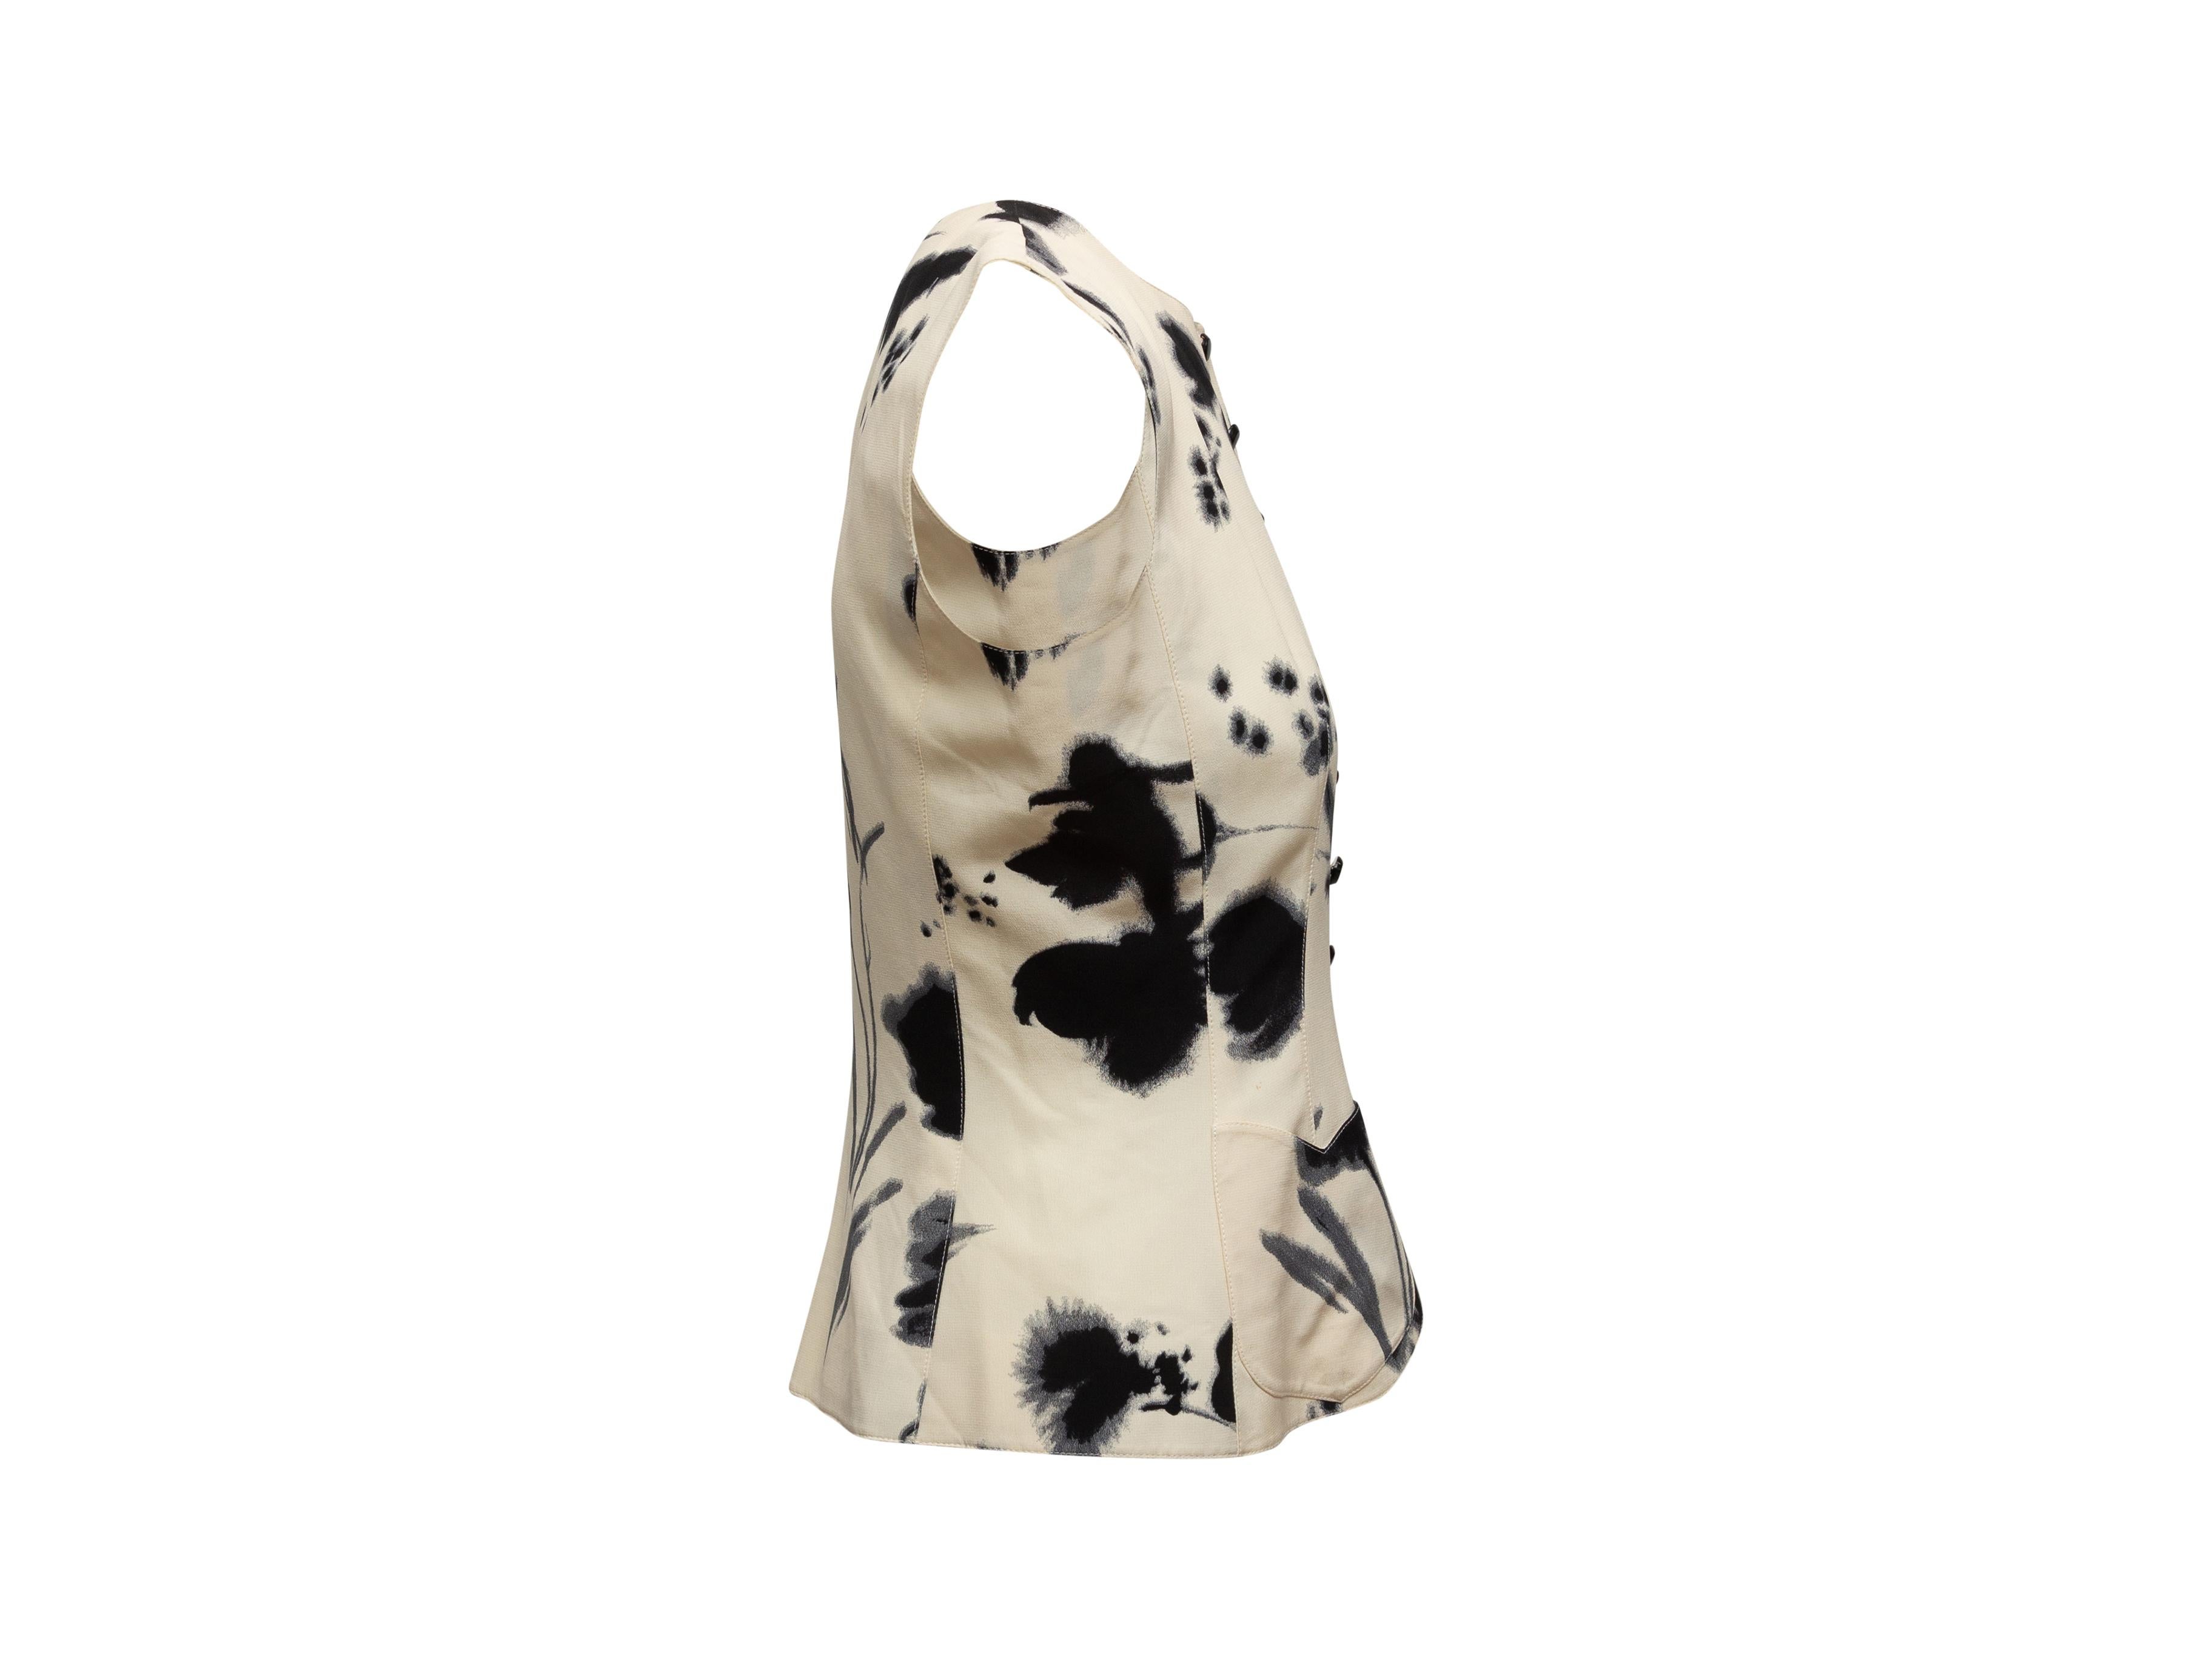 Product details: Vintage white and black silk sleeveless top by Emanuel Ungaro. Abstract floral print throughout. Crew neck. Dual patch pockets. Button closures at center front. 36